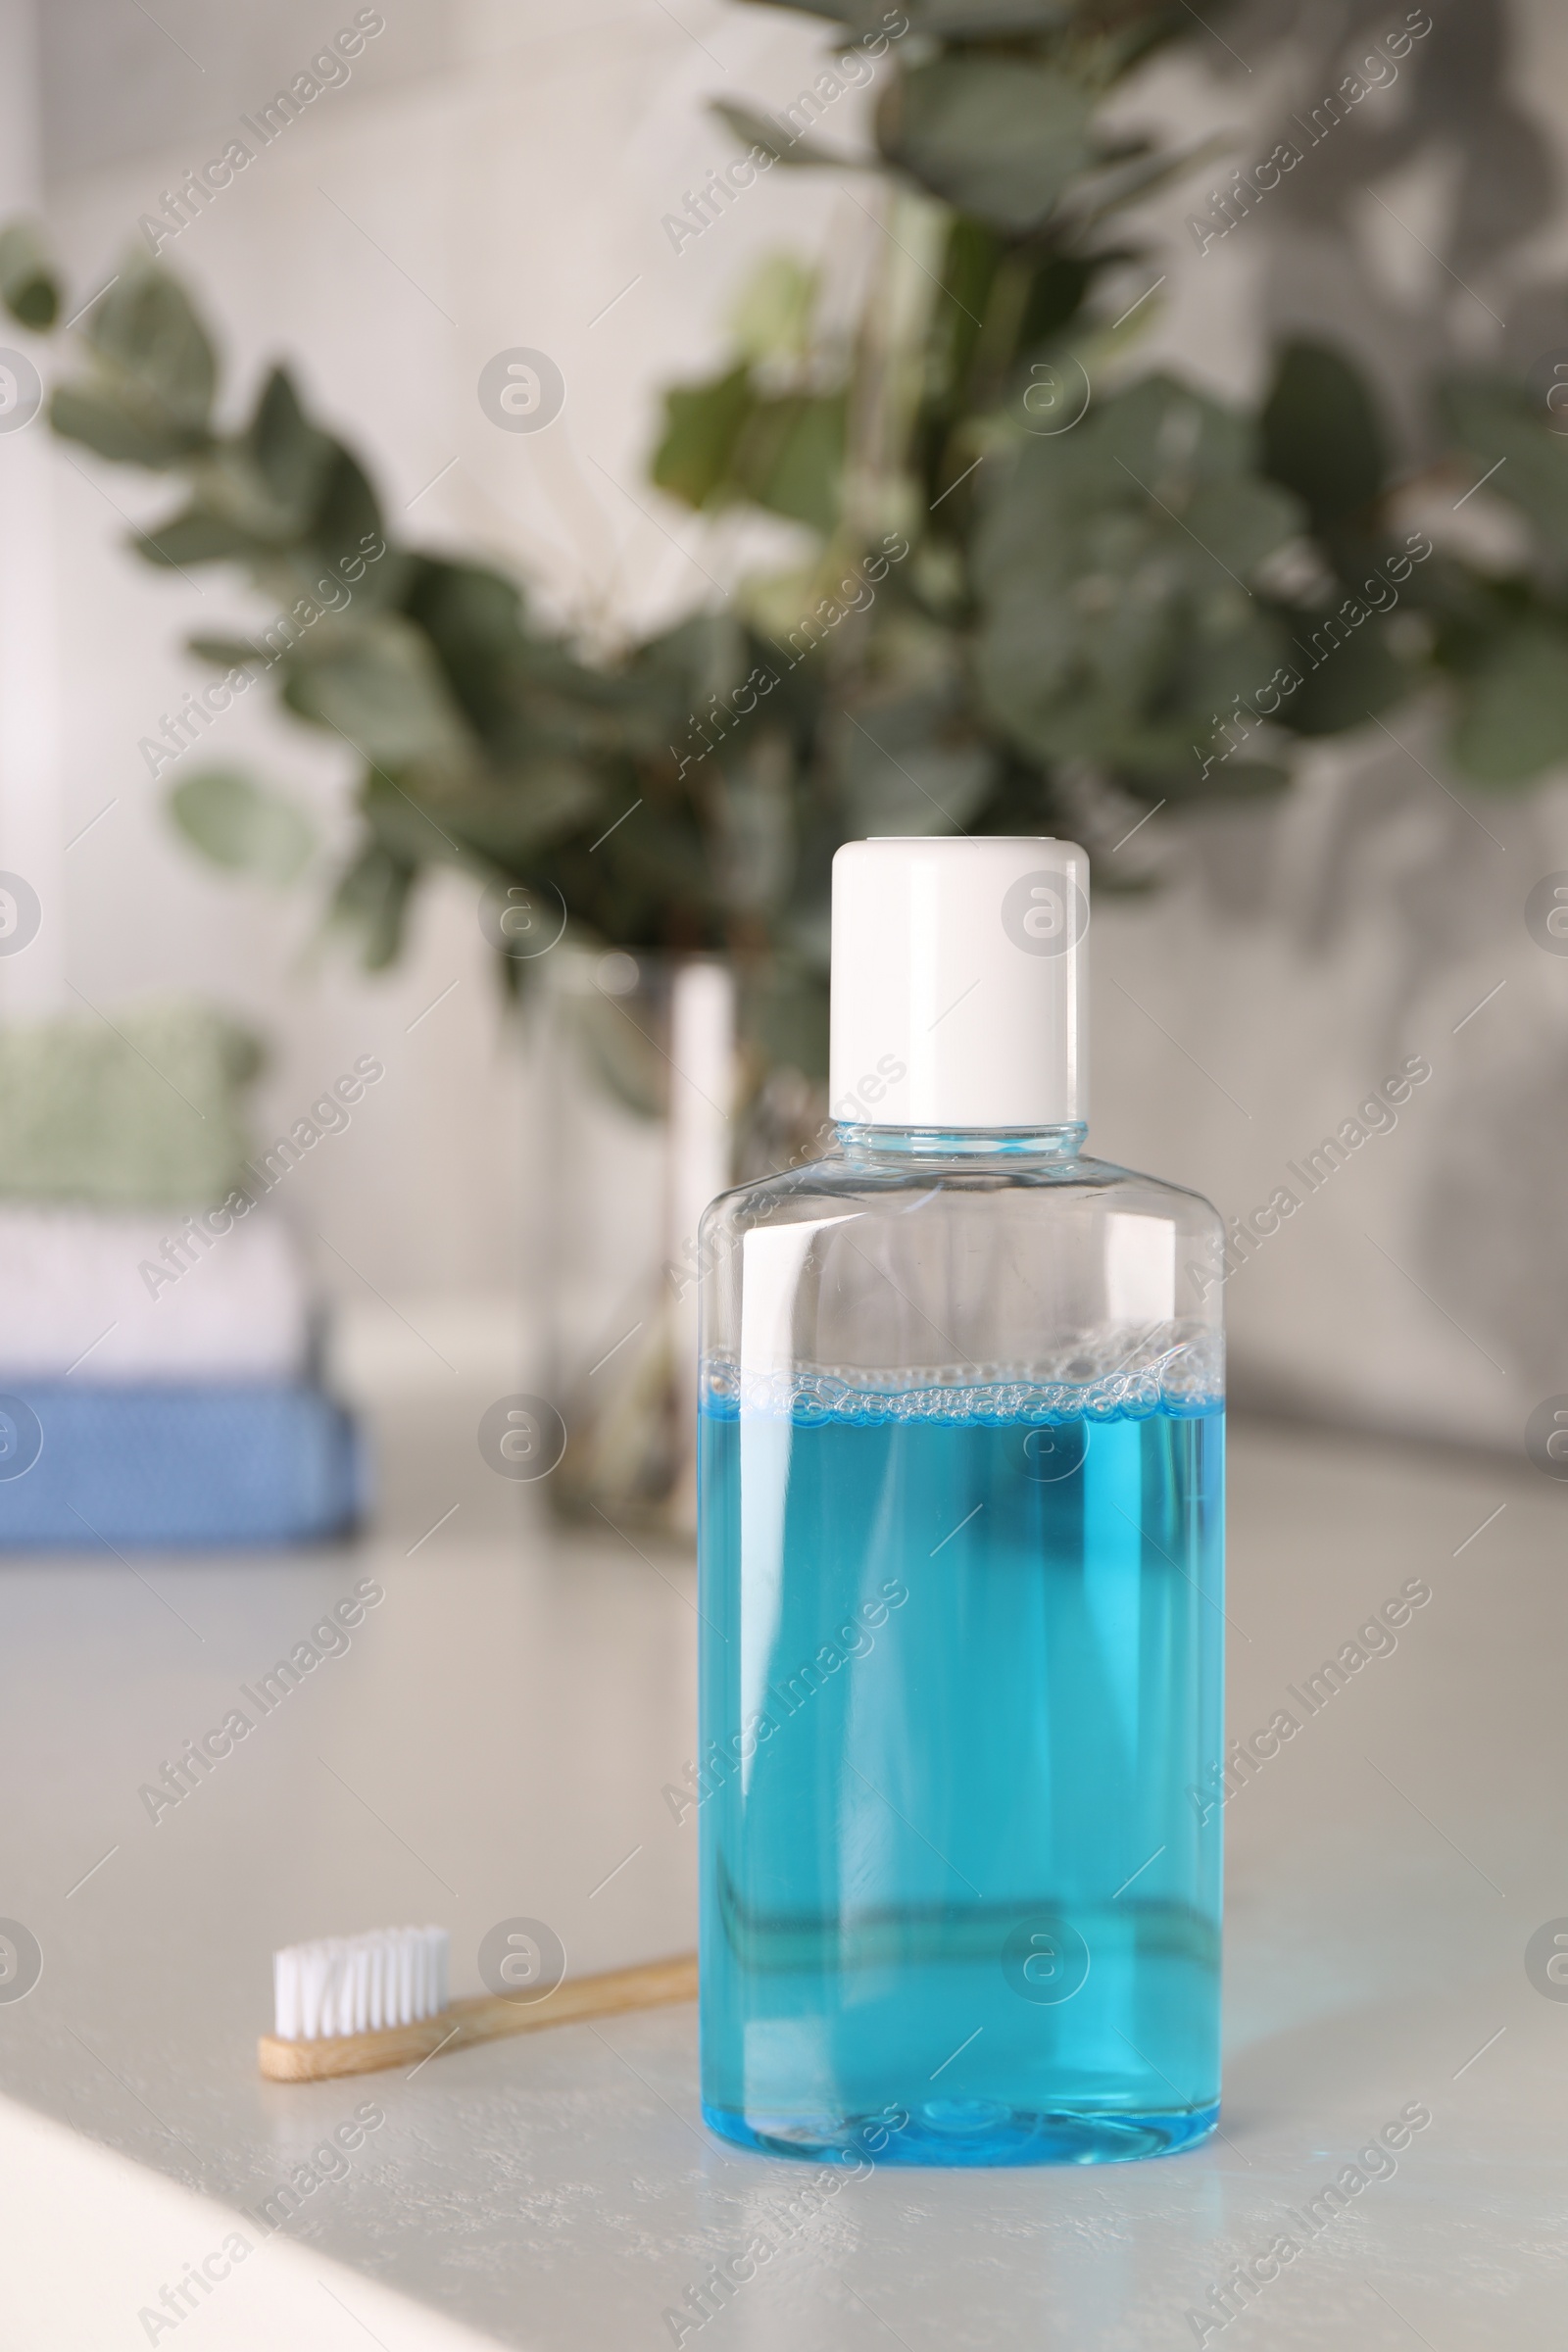 Photo of Bottle of mouthwash and toothbrush on white table in bathroom